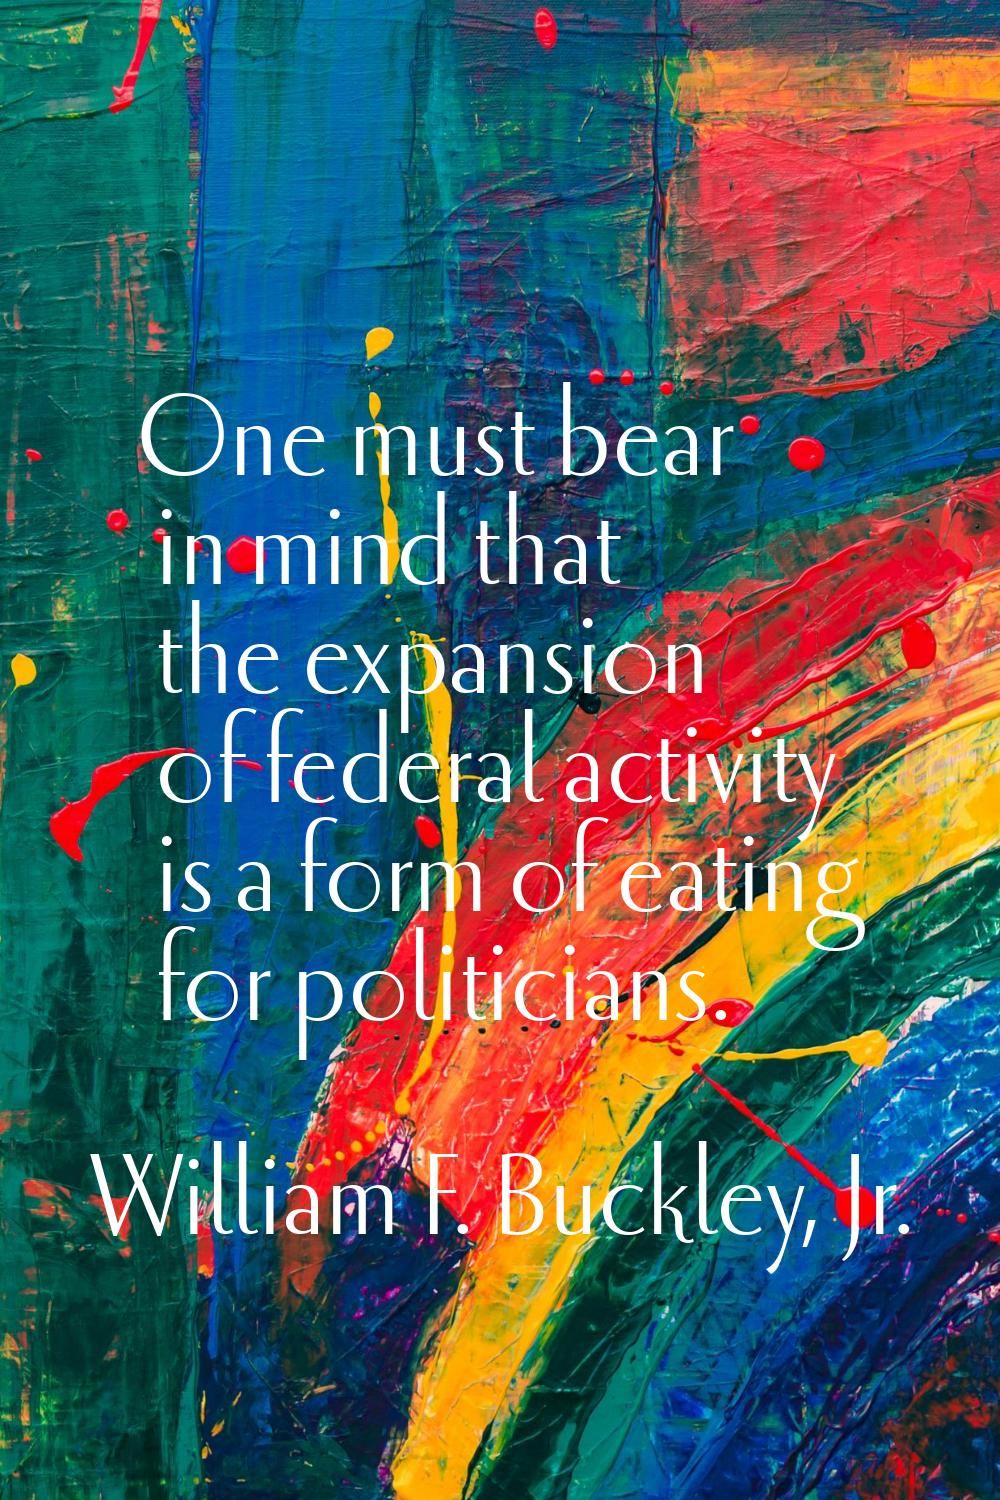 One must bear in mind that the expansion of federal activity is a form of eating for politicians.